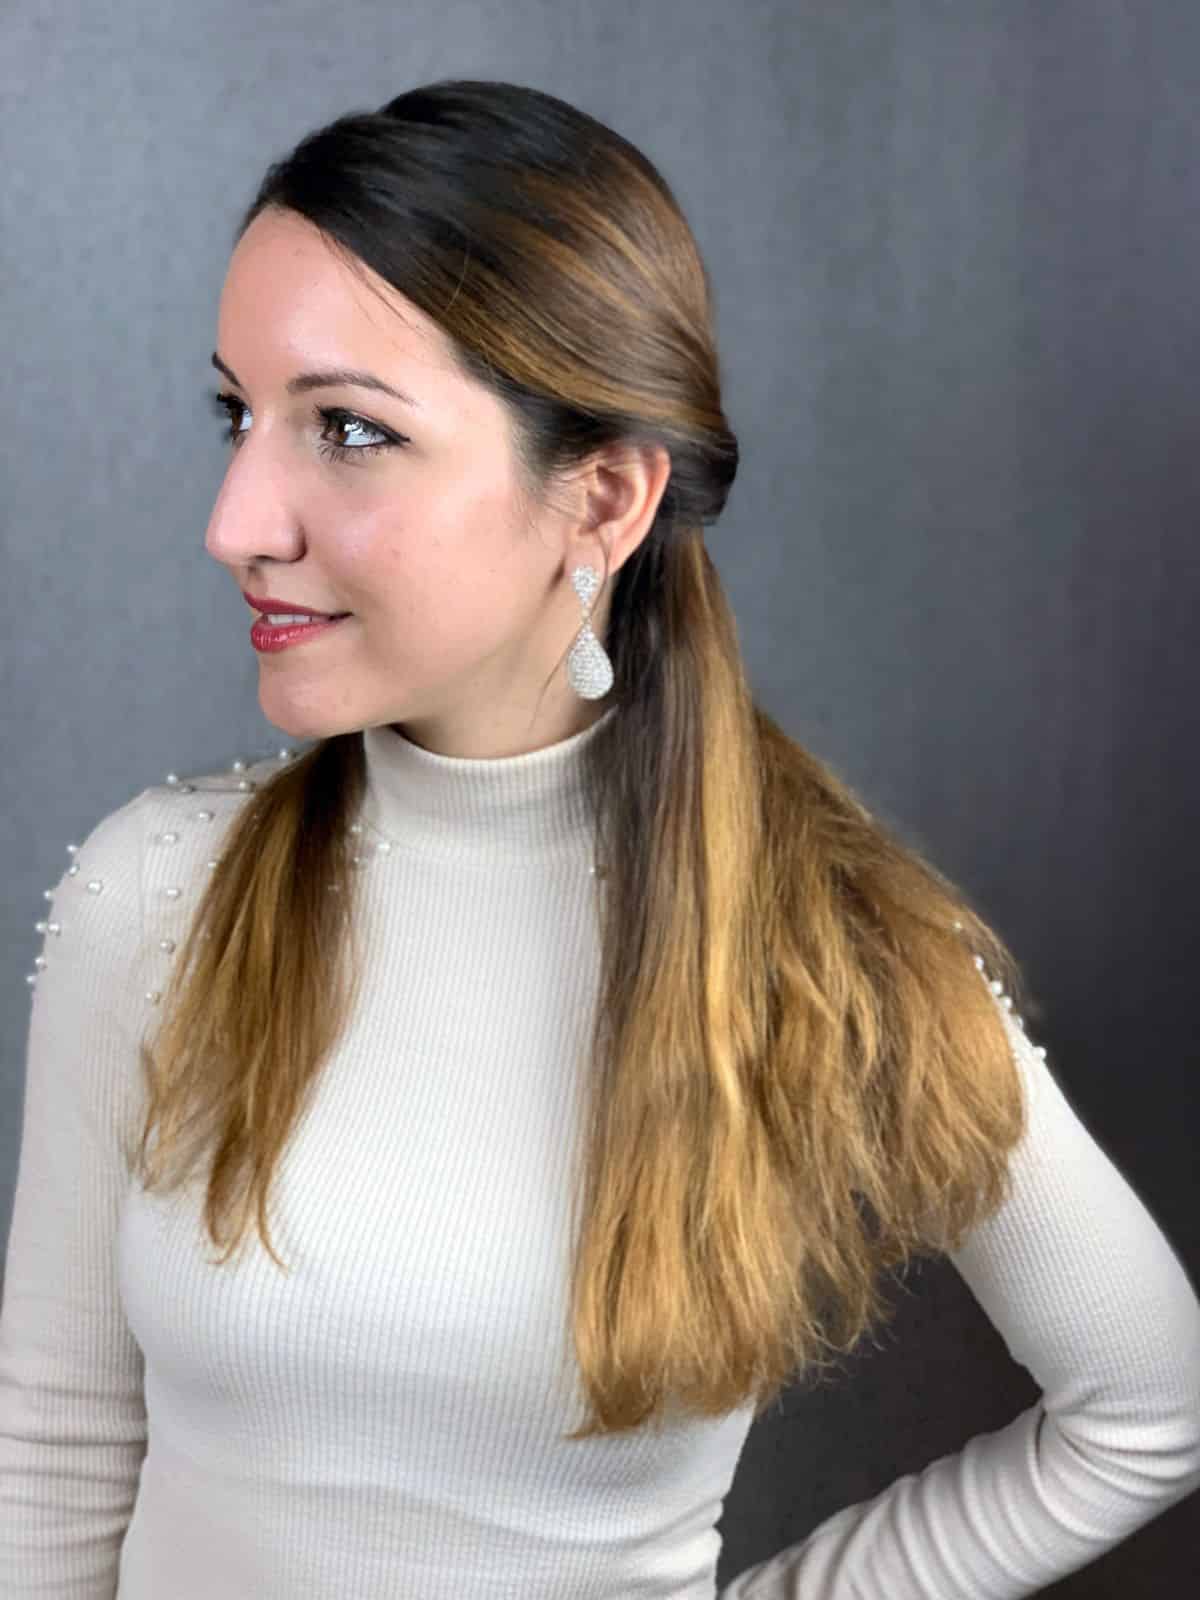 hair half up on lady with brown hair wearing white shirt